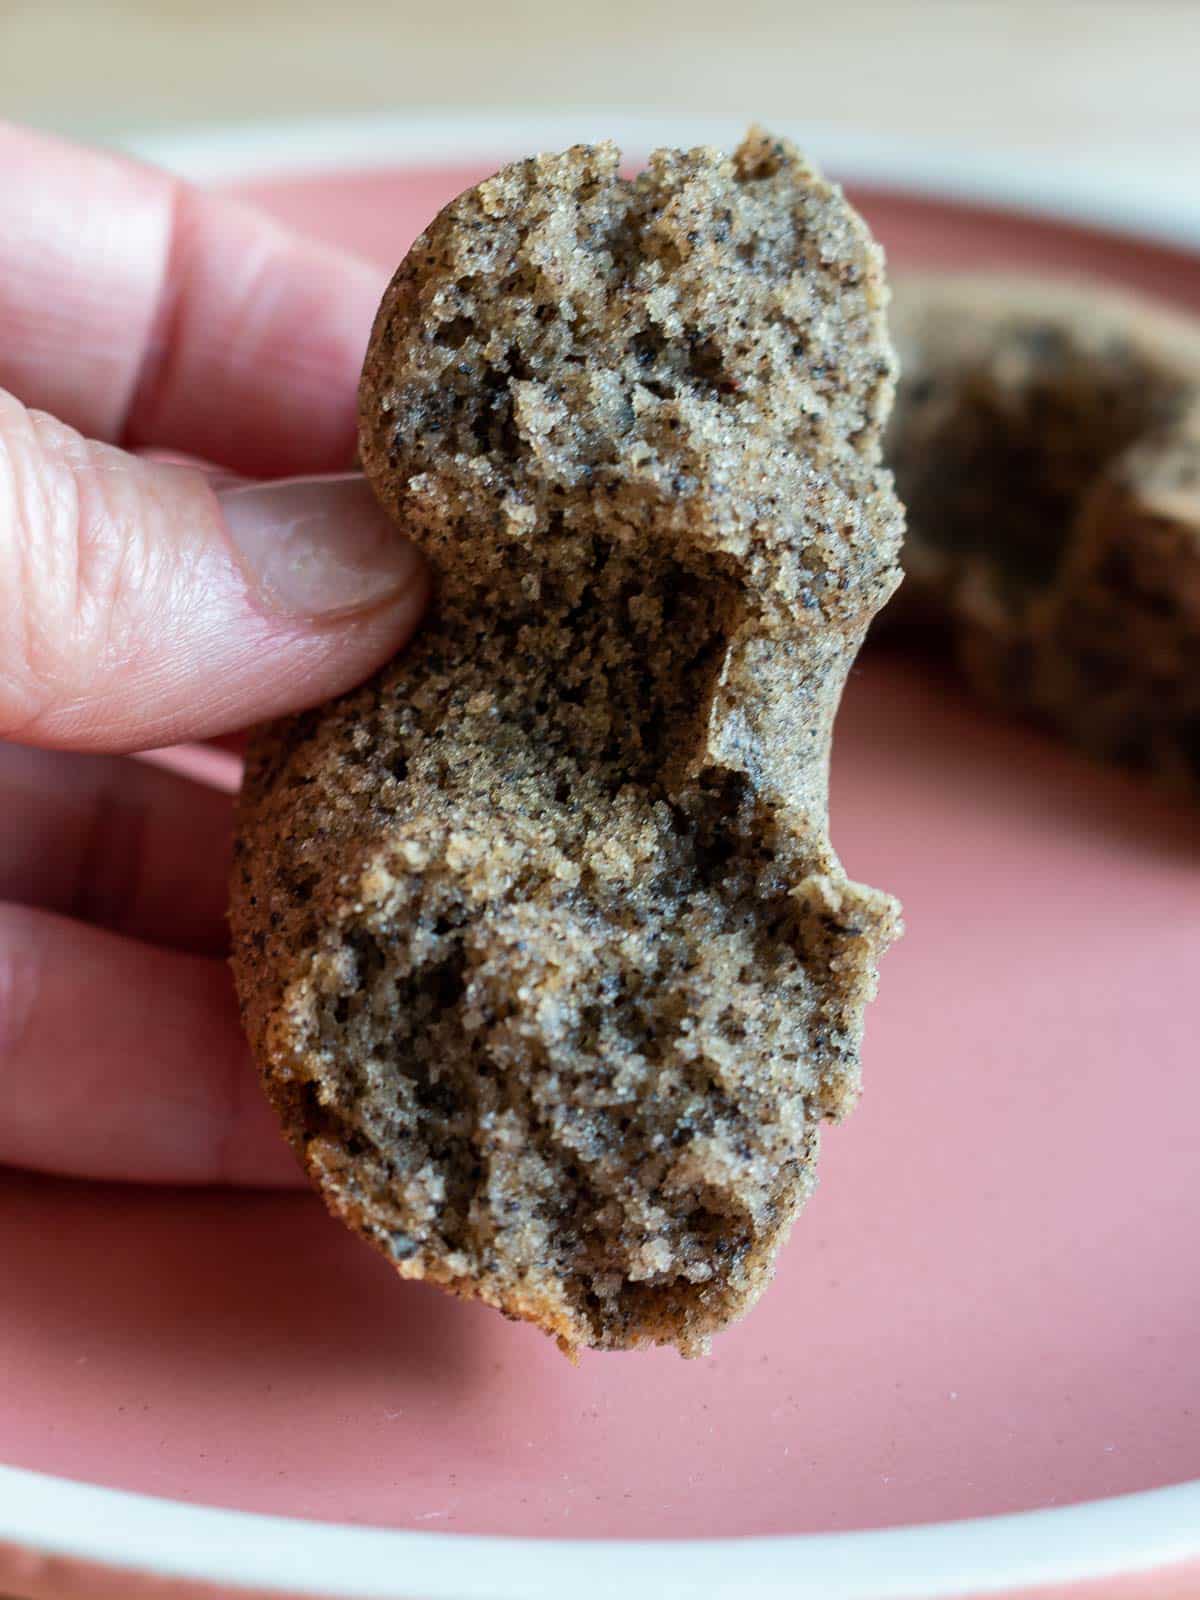 Baked black sesame mochi donut split in half showing the tender but chewy texture.